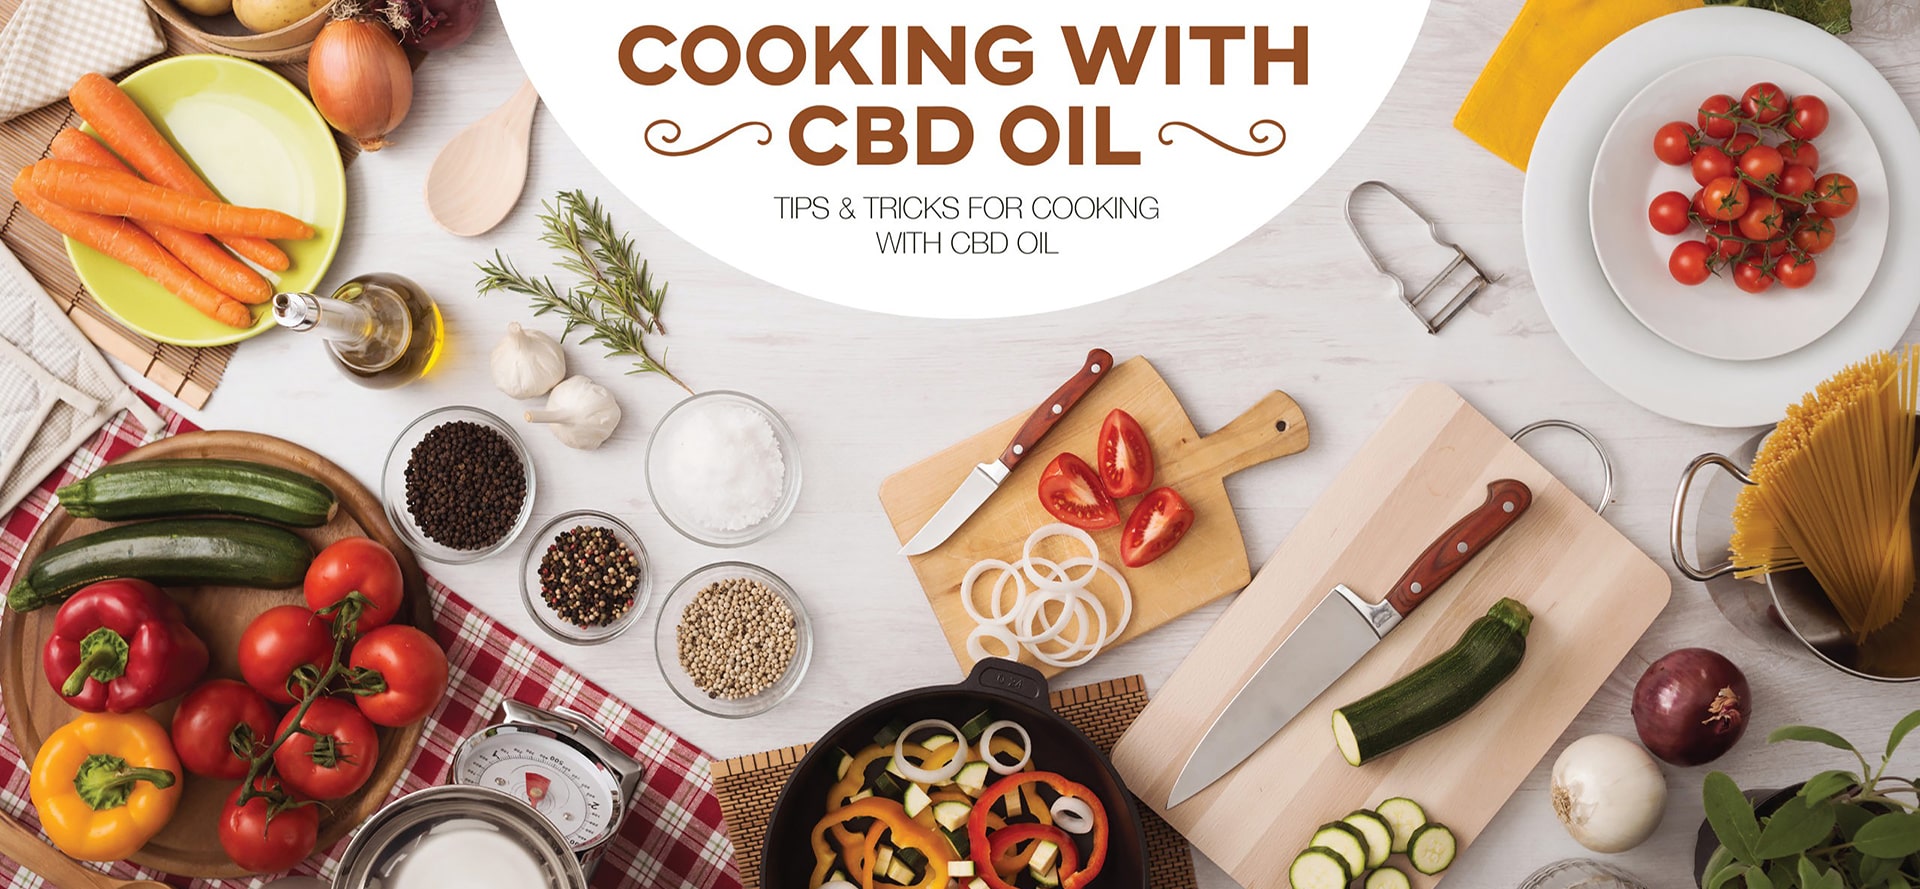 Cooking With CBD oil.